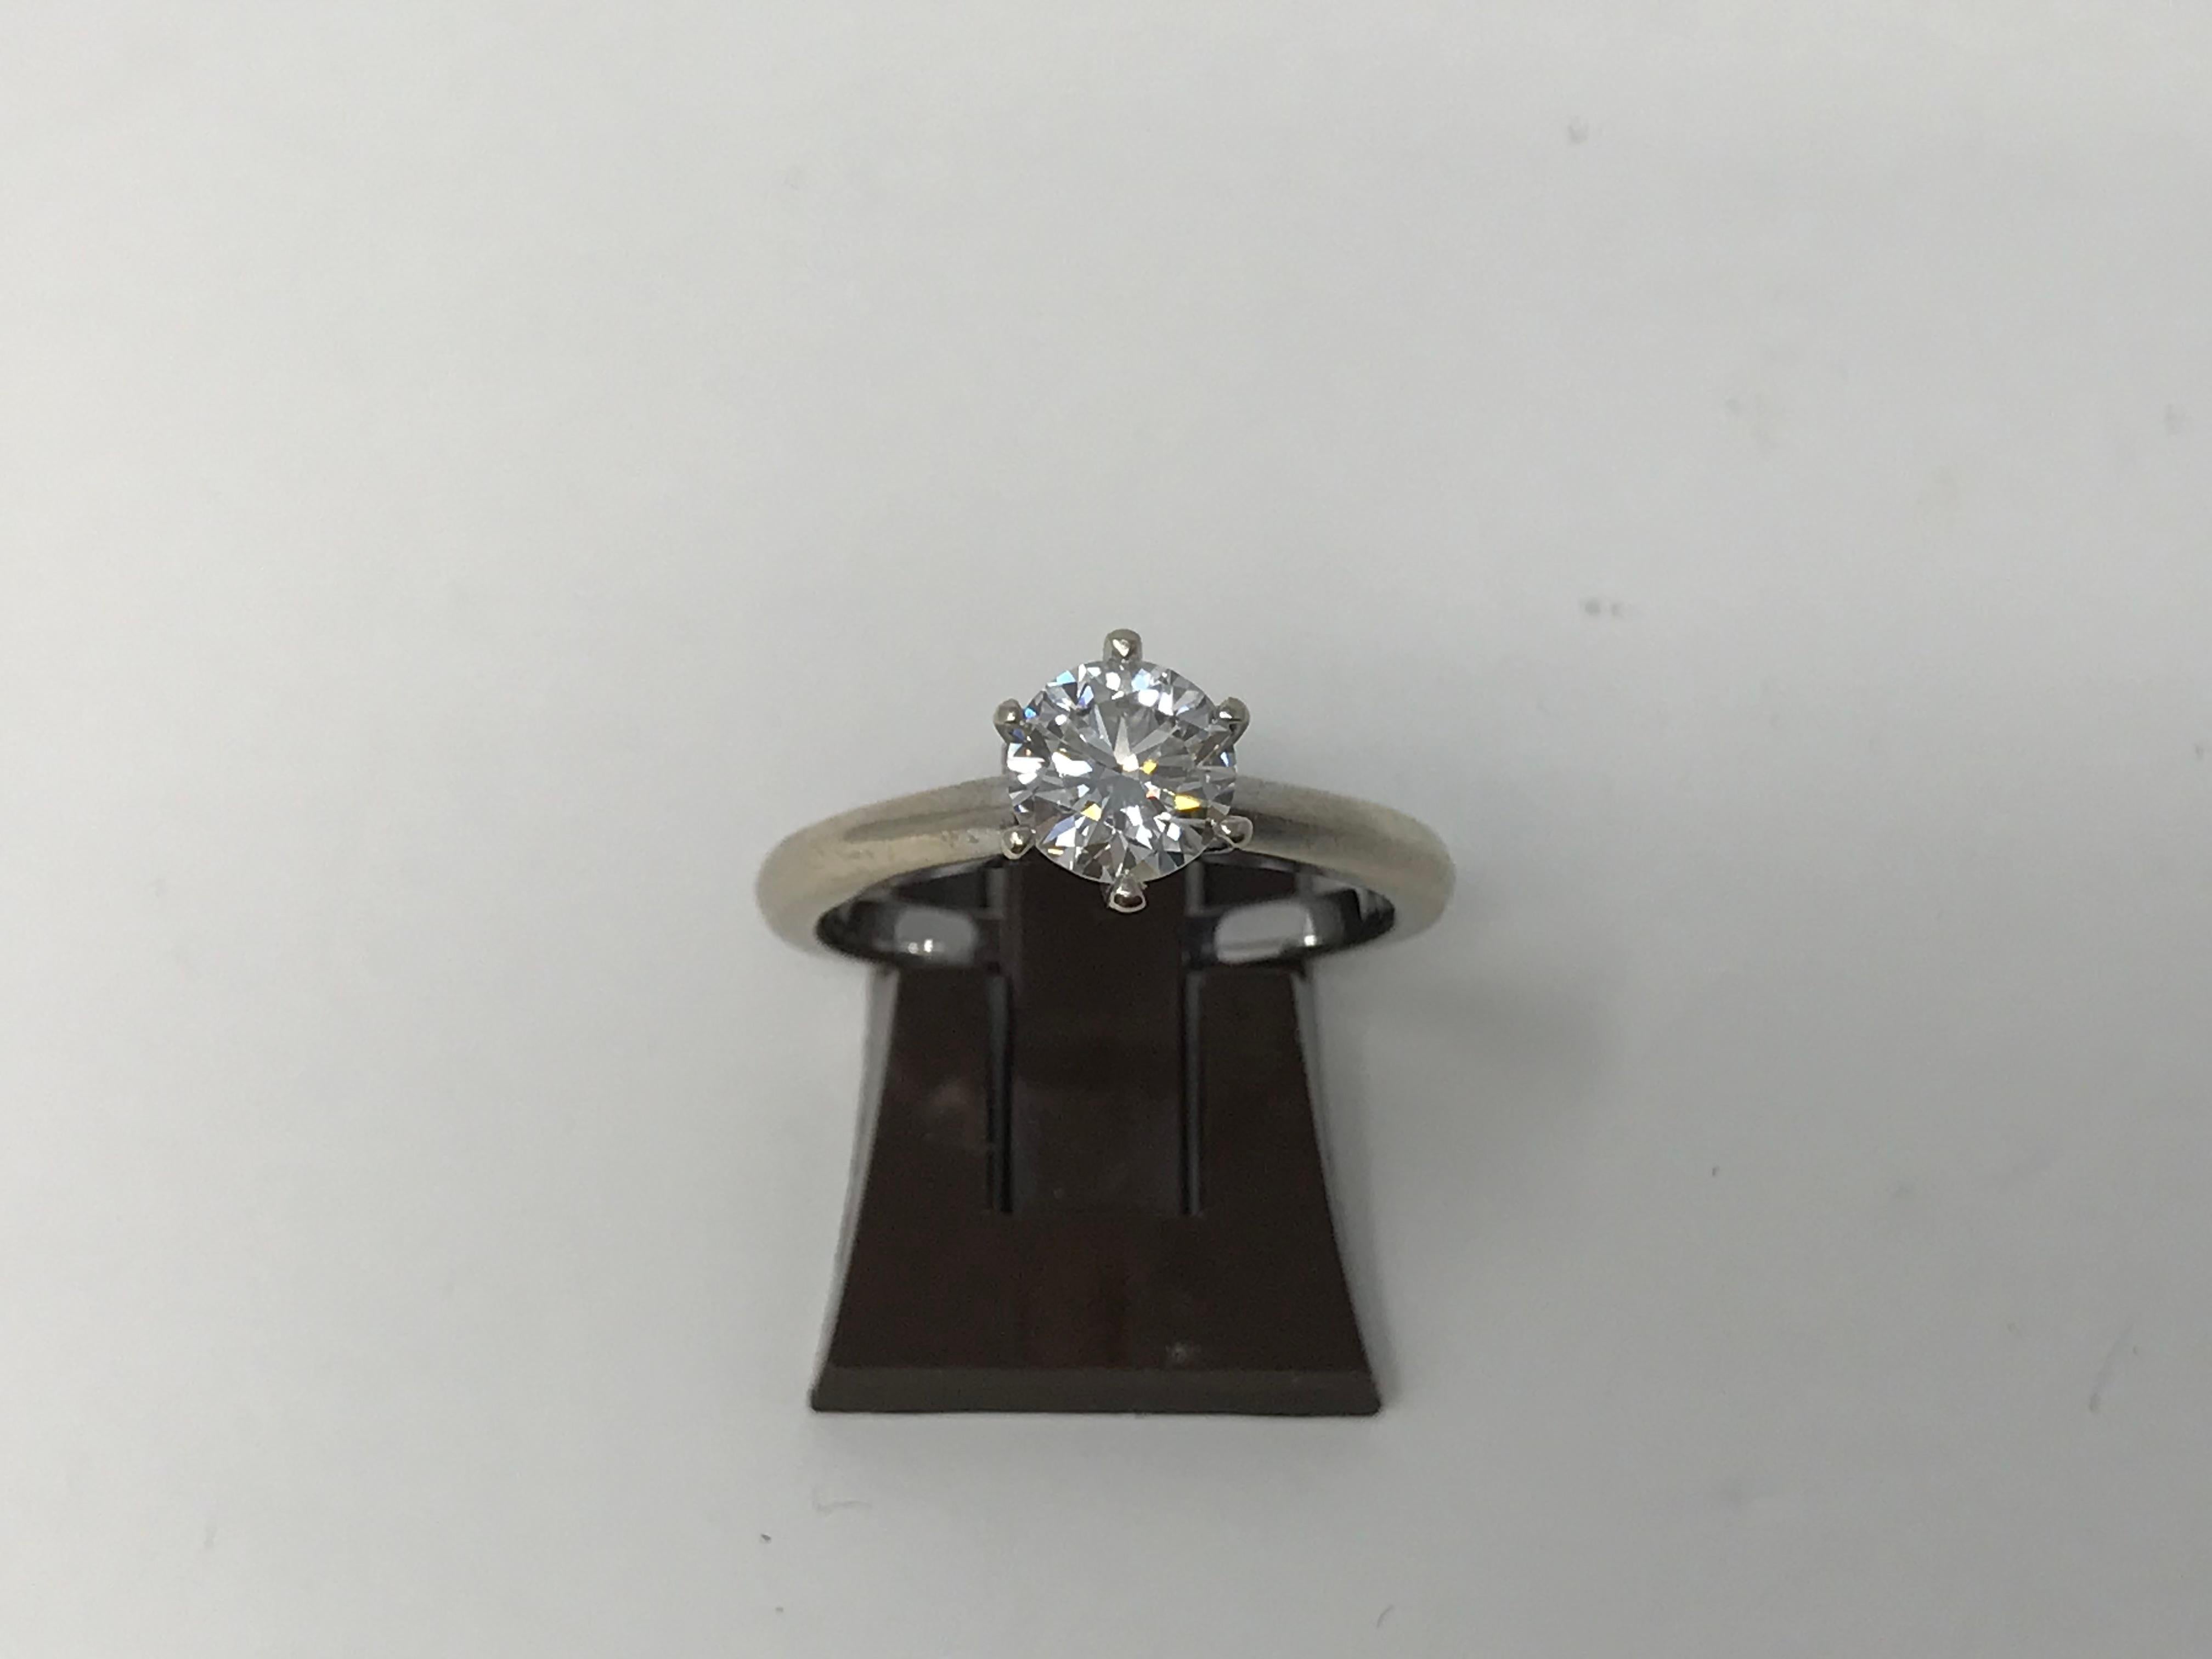 JLJ 14k white gold (stamped) engagement ring with 1ct certified diamond. Jenni Lauren jewelry engagement ring. IGI certificate 7019584U and CGQ certificate 1905247.01 are available. Solitaire style, polished and rhodium finish. The ring is set with